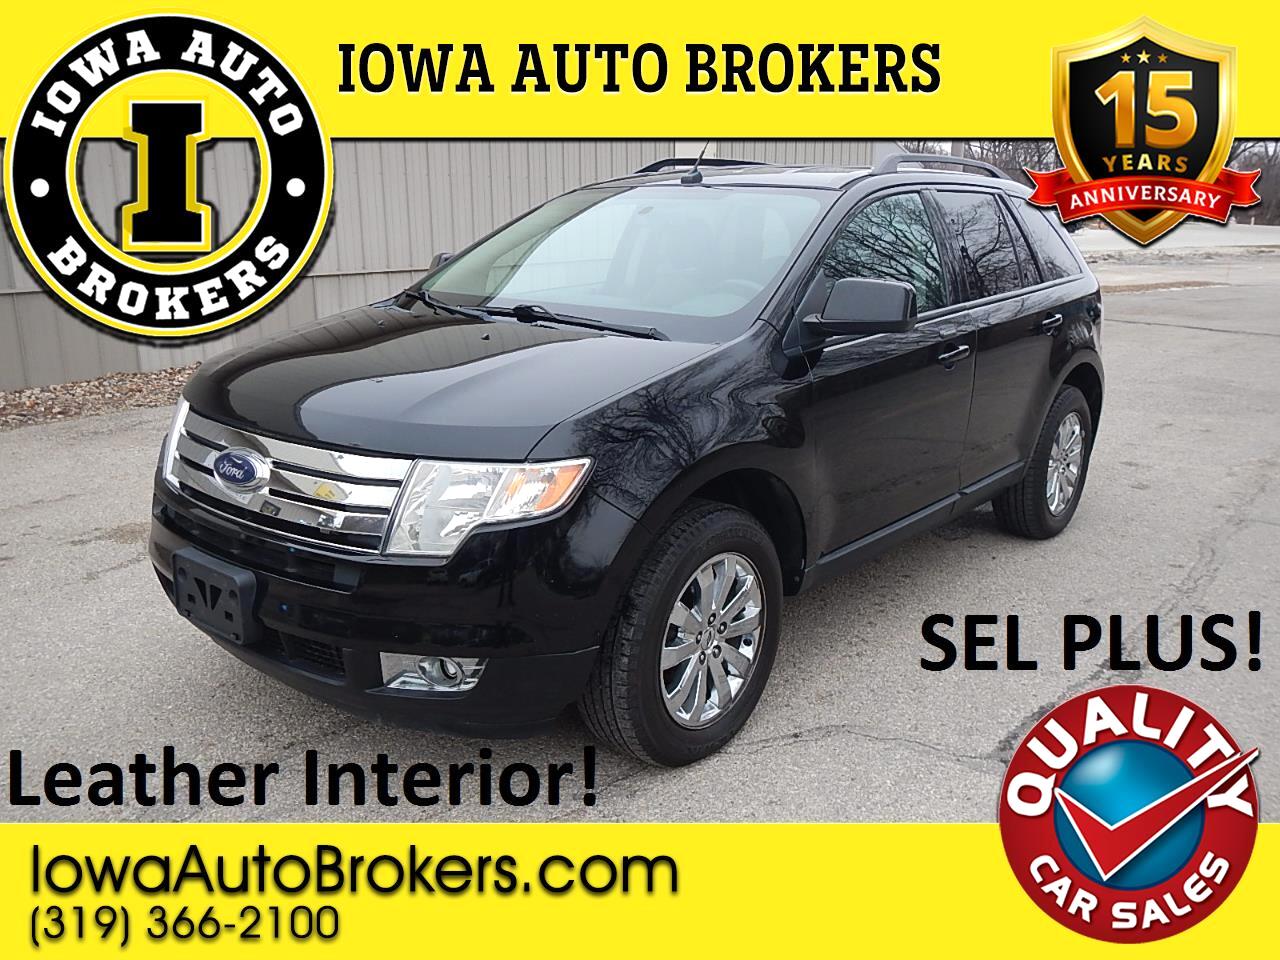 Used 2007 Ford Edge Sel Plus For Sale In Marion Ia 52302